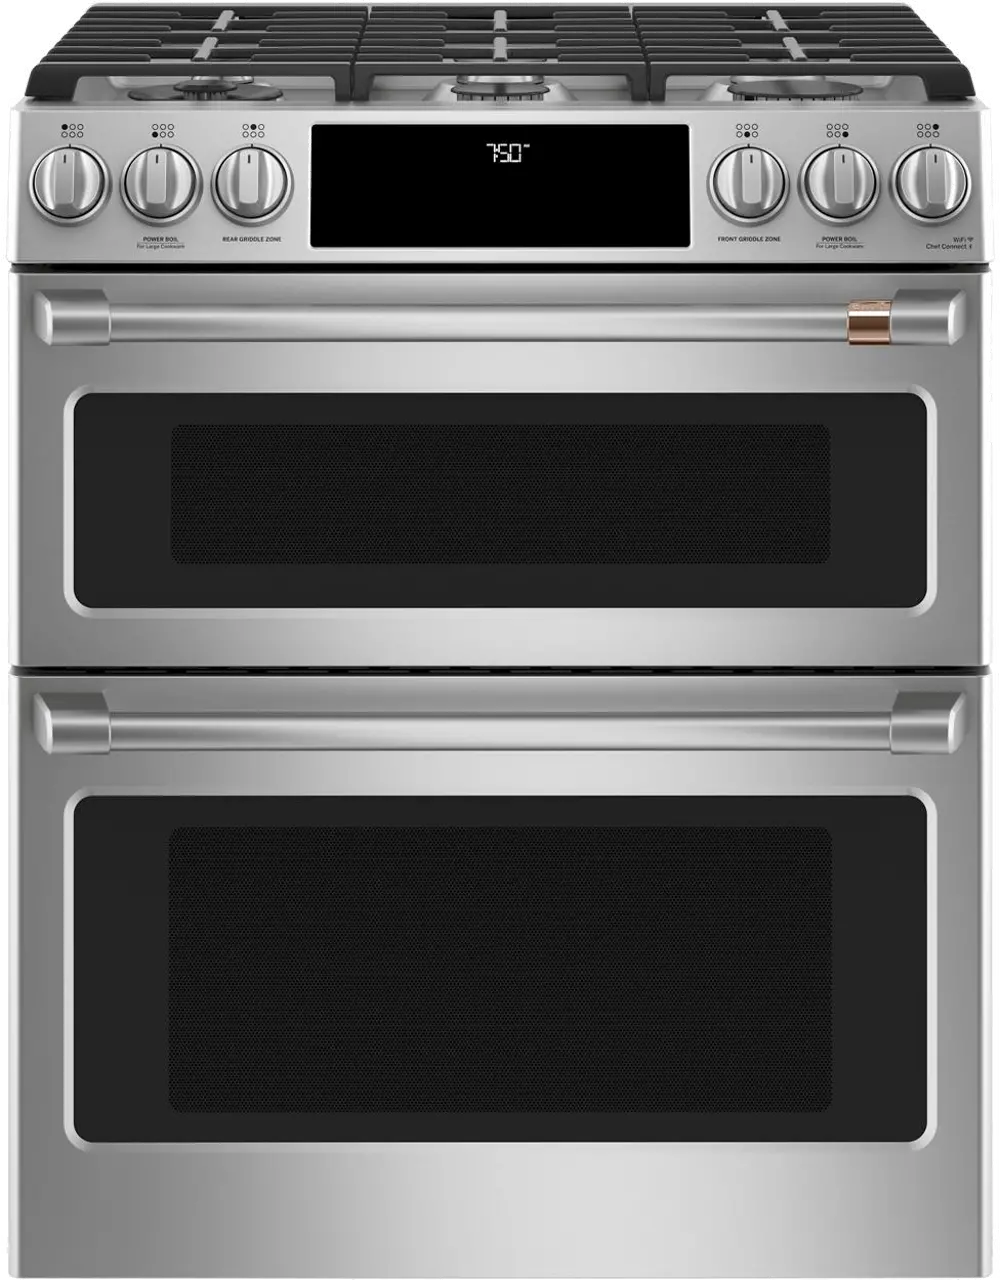 CGS750P2MS1 Cafe 6.7 cu ft Double Oven Gas Range - Stainless Steel-1